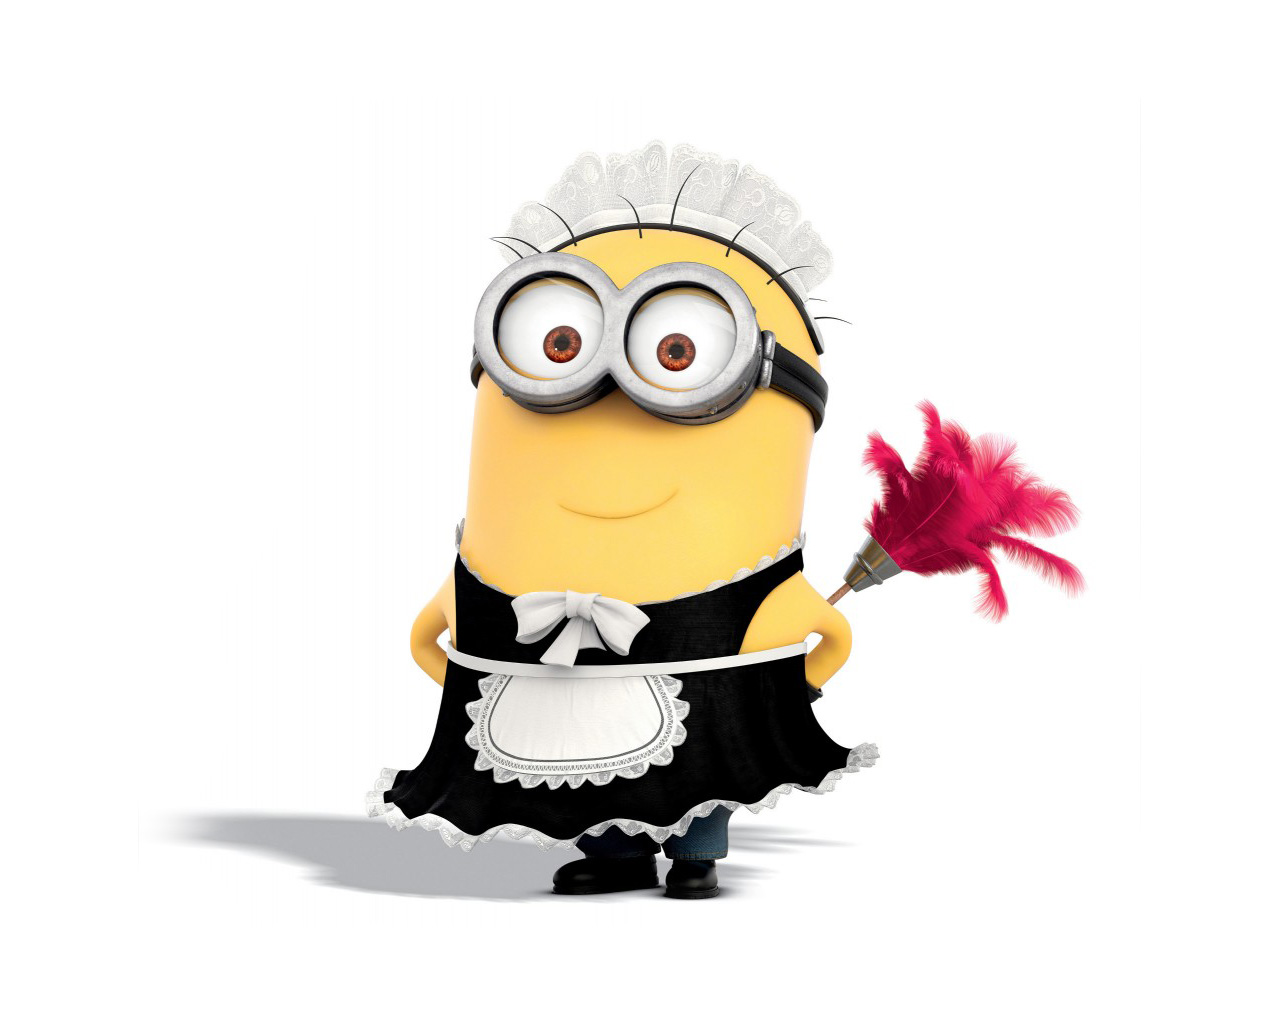 free clipart of minions - photo #13